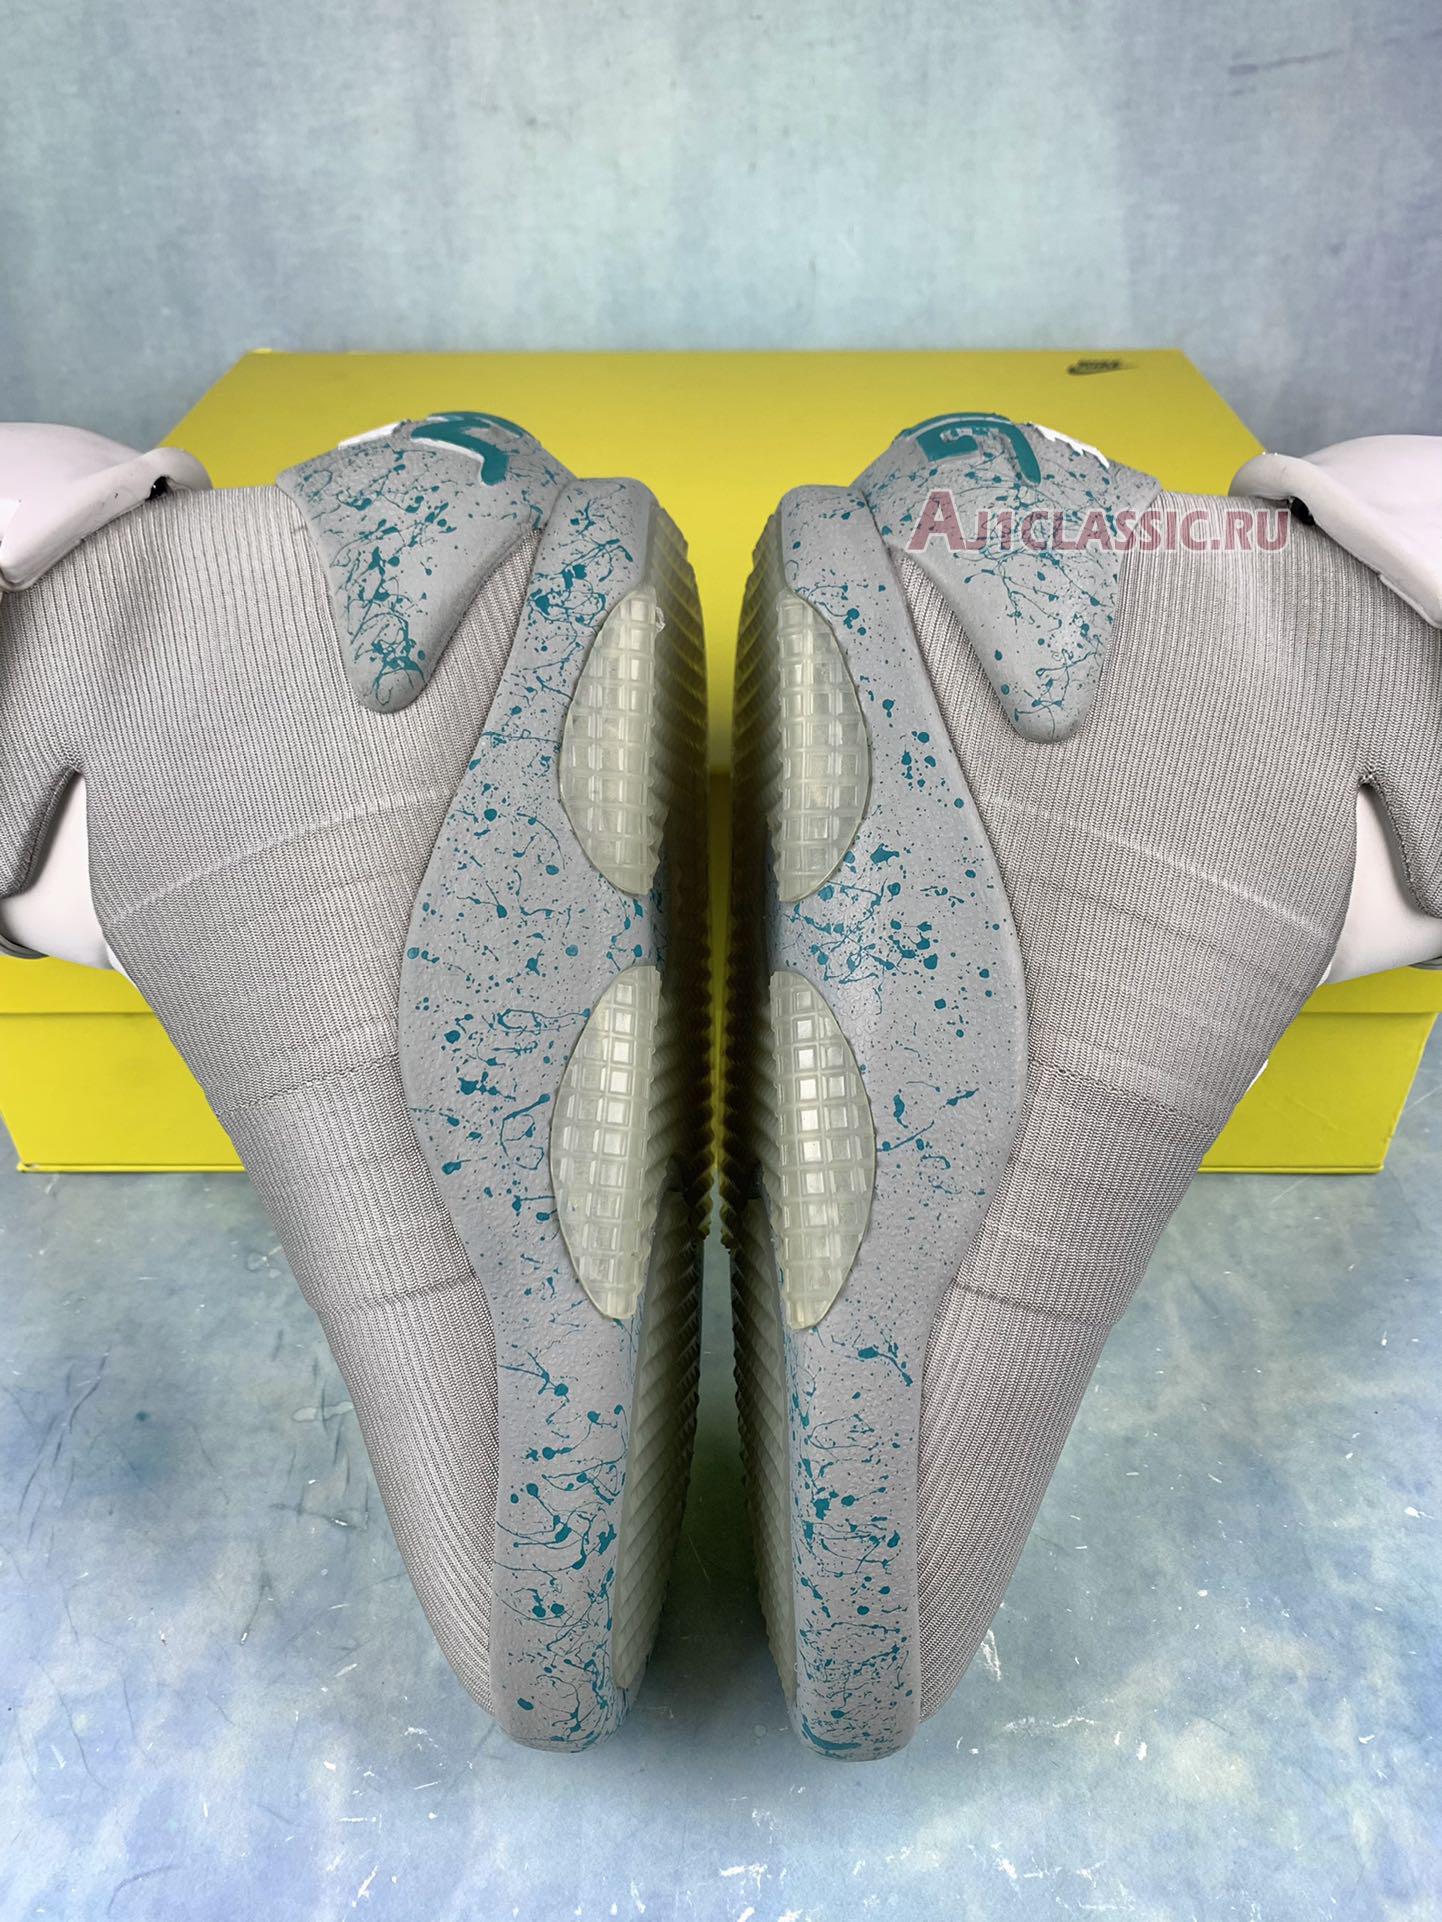 Nike Air Mag "Back To The Future" 417744-001 (Regular)